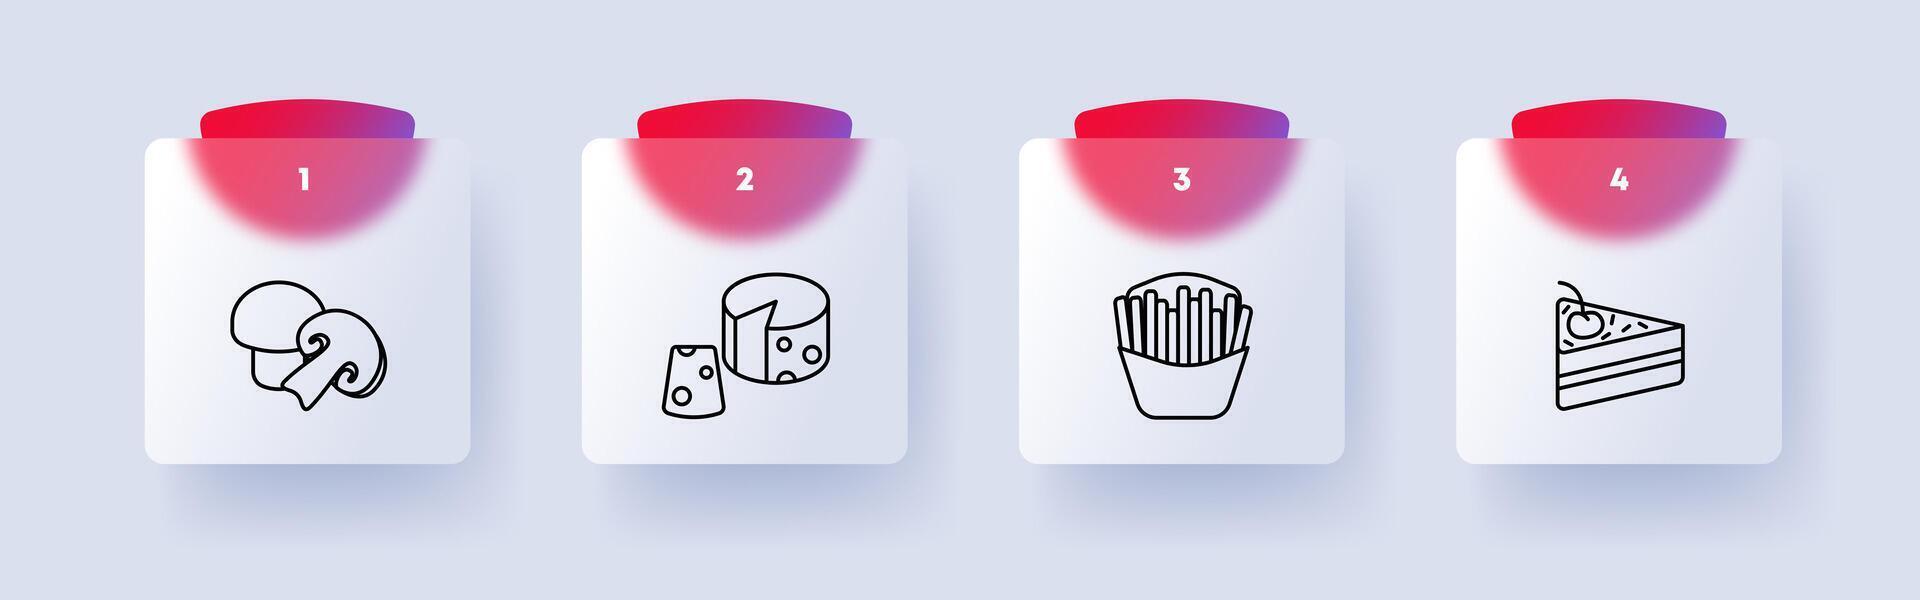 Food set icon. Mushrooms, cut, white and chanterelle mushroom, French fries, fast food, junk food, cake with cream and cherry, cheese with holes, delicacies, unusual food. Glassmorphism style. vector